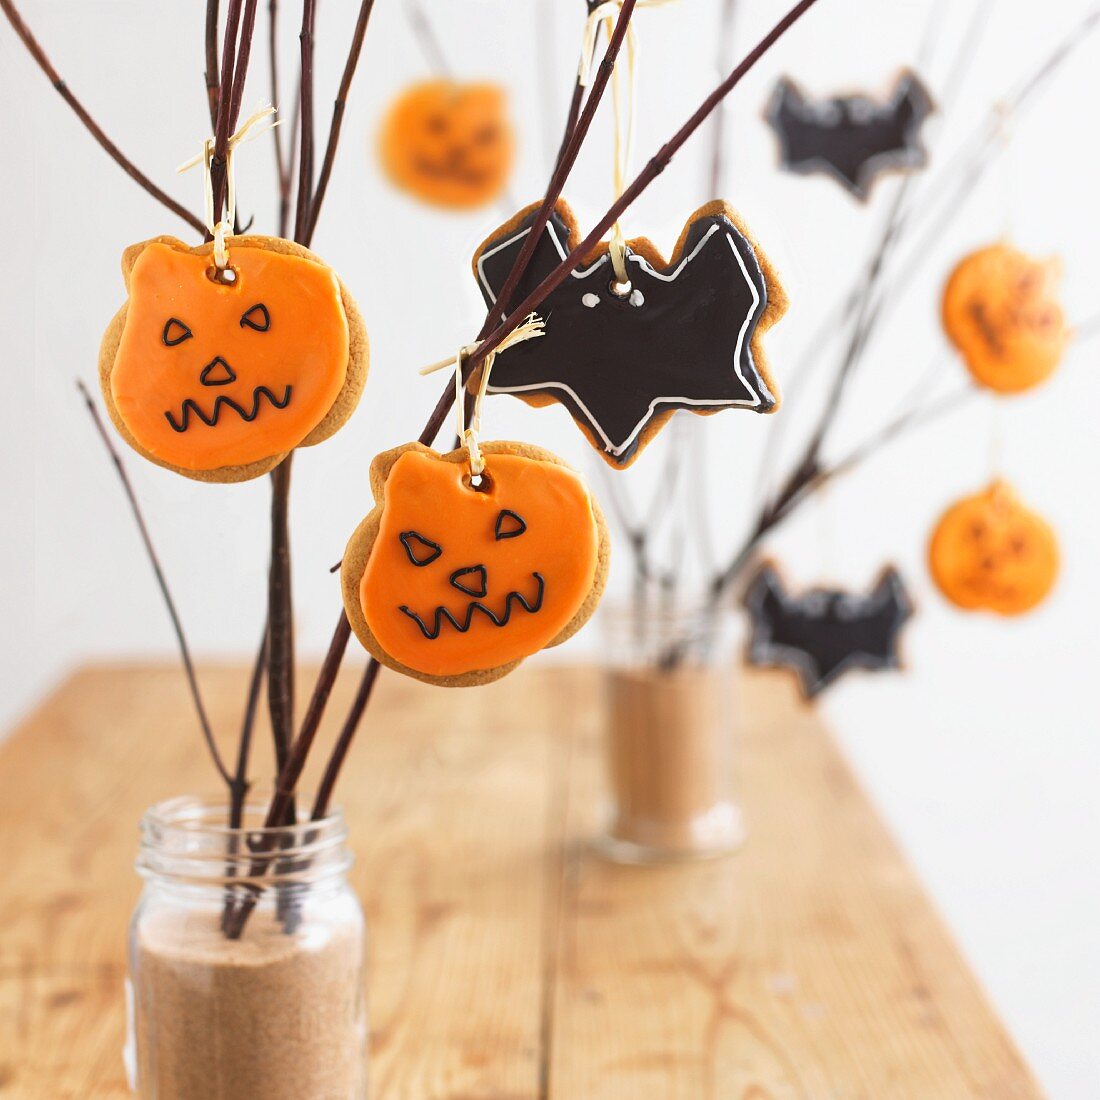 A variety of Halloween cookies hanging on branches